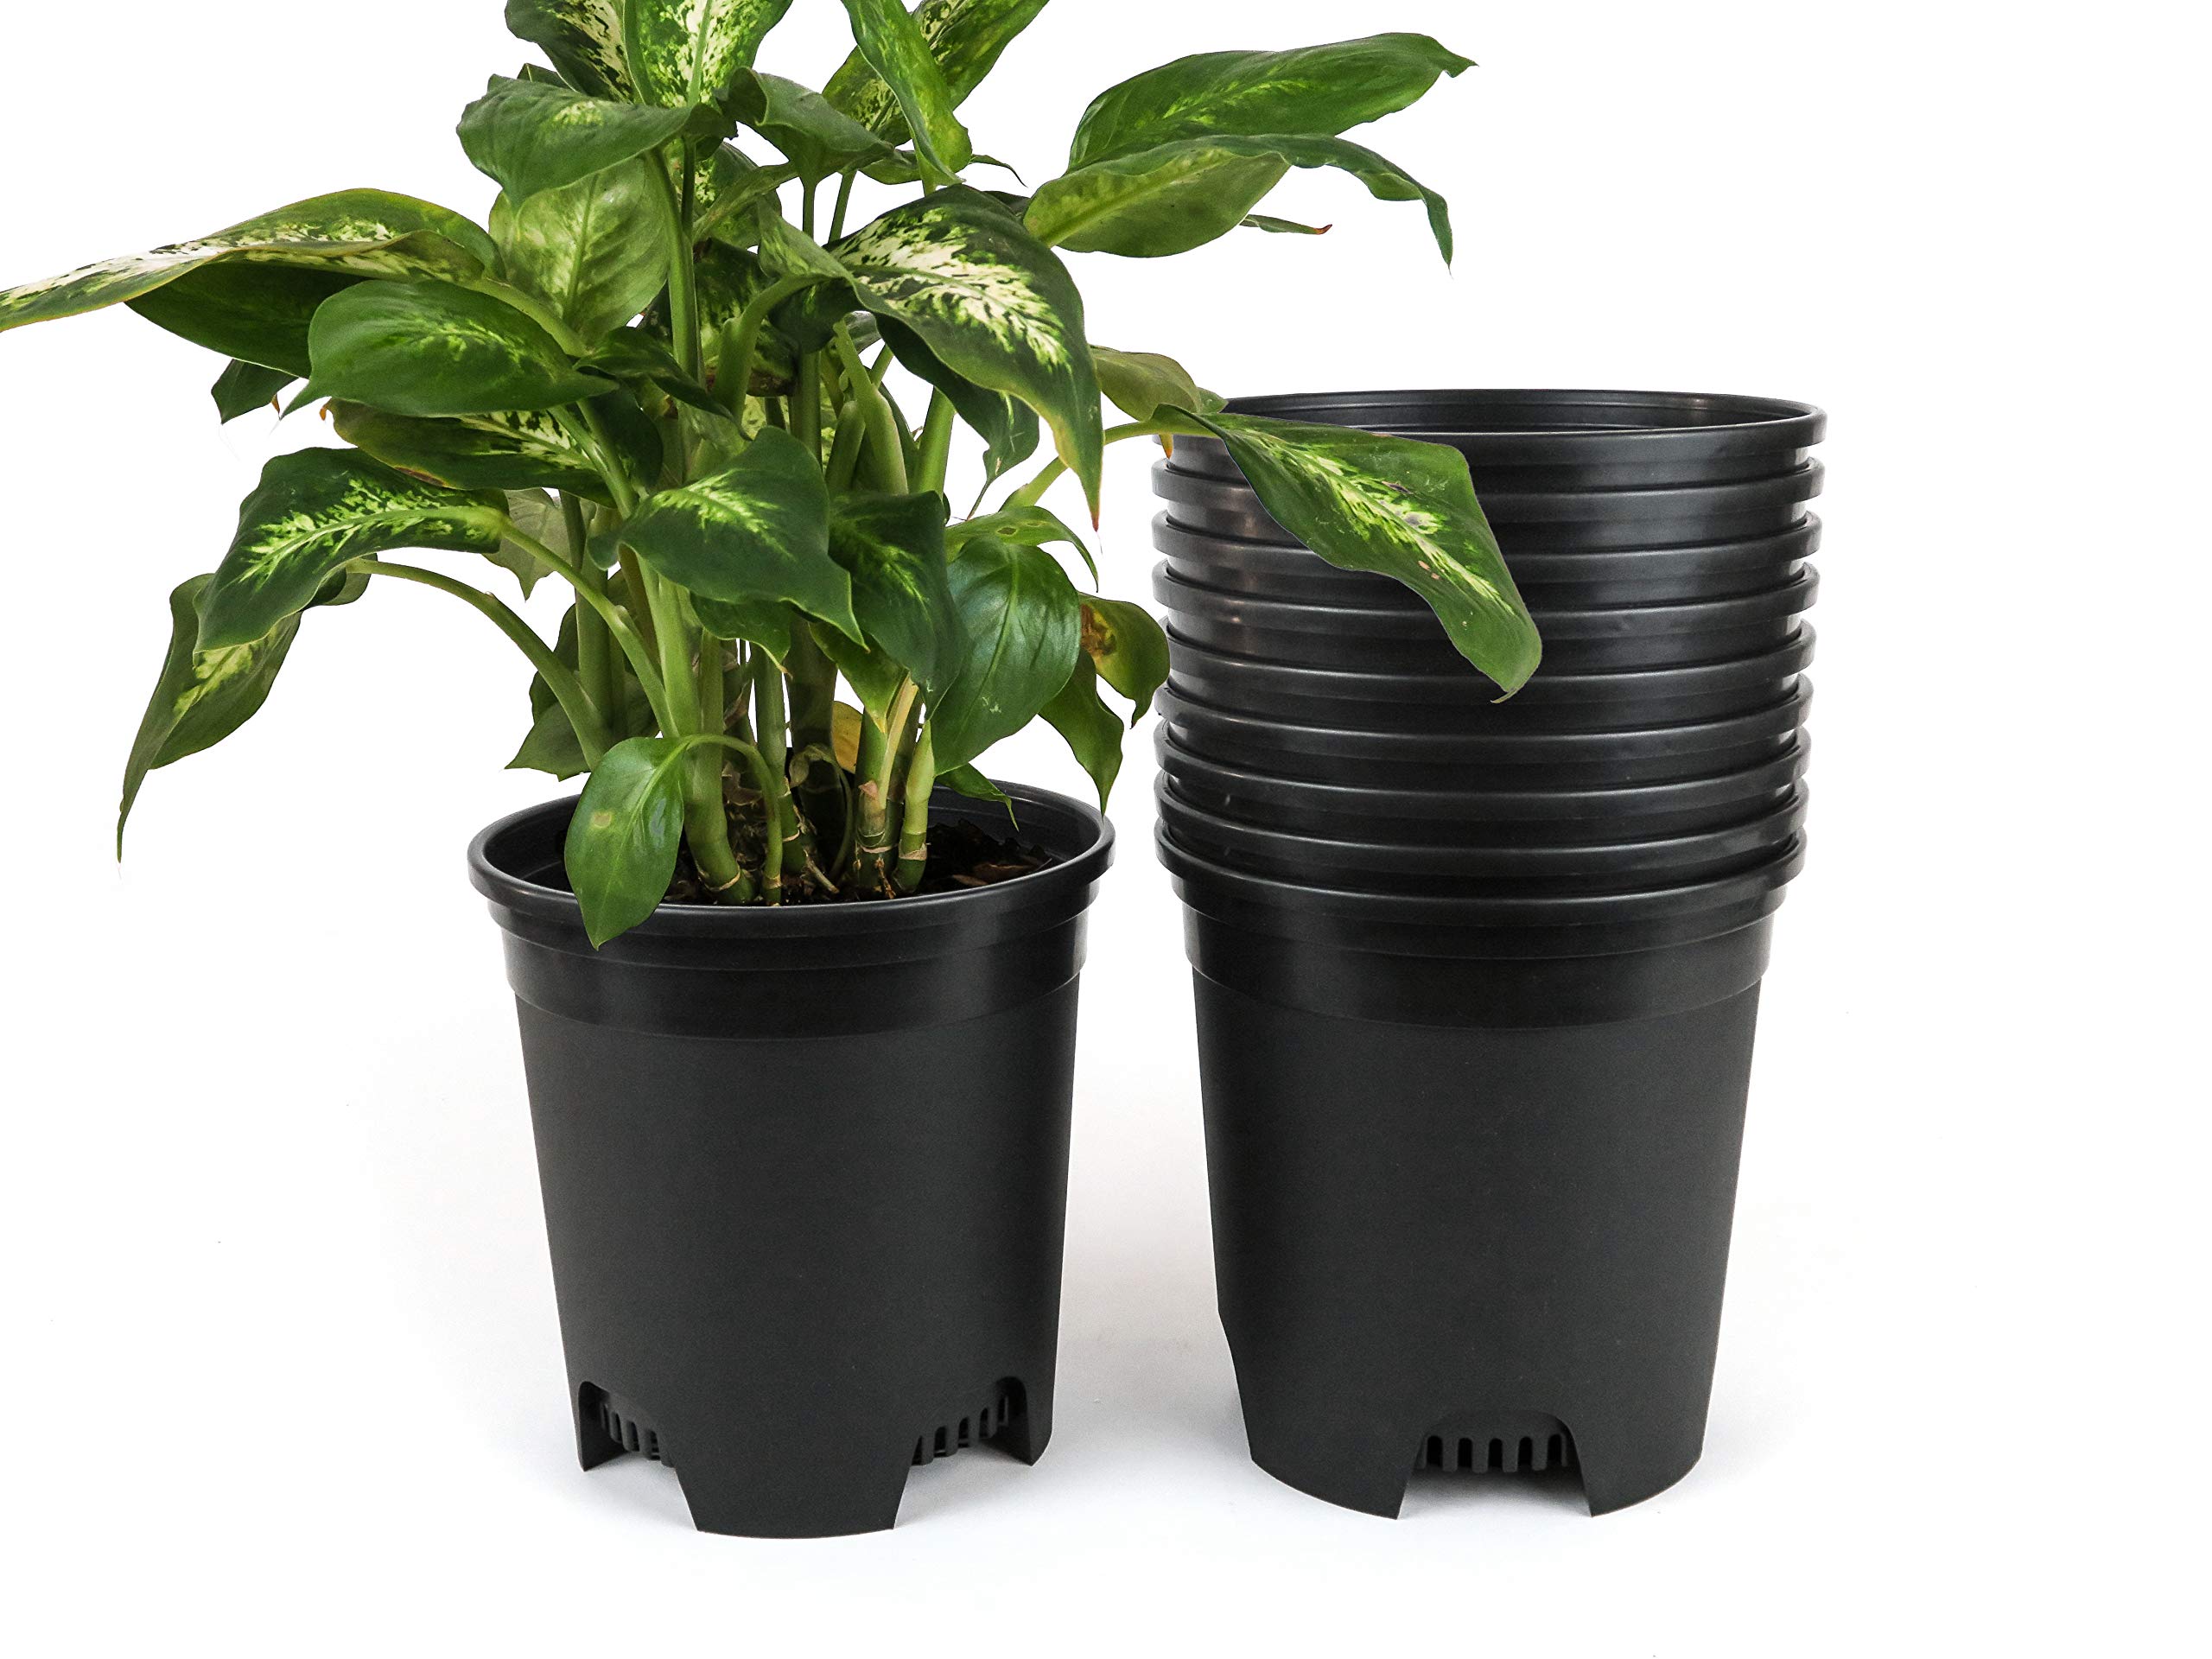 Cotta Planters 15 Gallon Black Nursery Pot Plastic Planters For Outdoor Indoor Plants Gardening Flower Pots 10-Pack 75 In Pot Liners With Drain